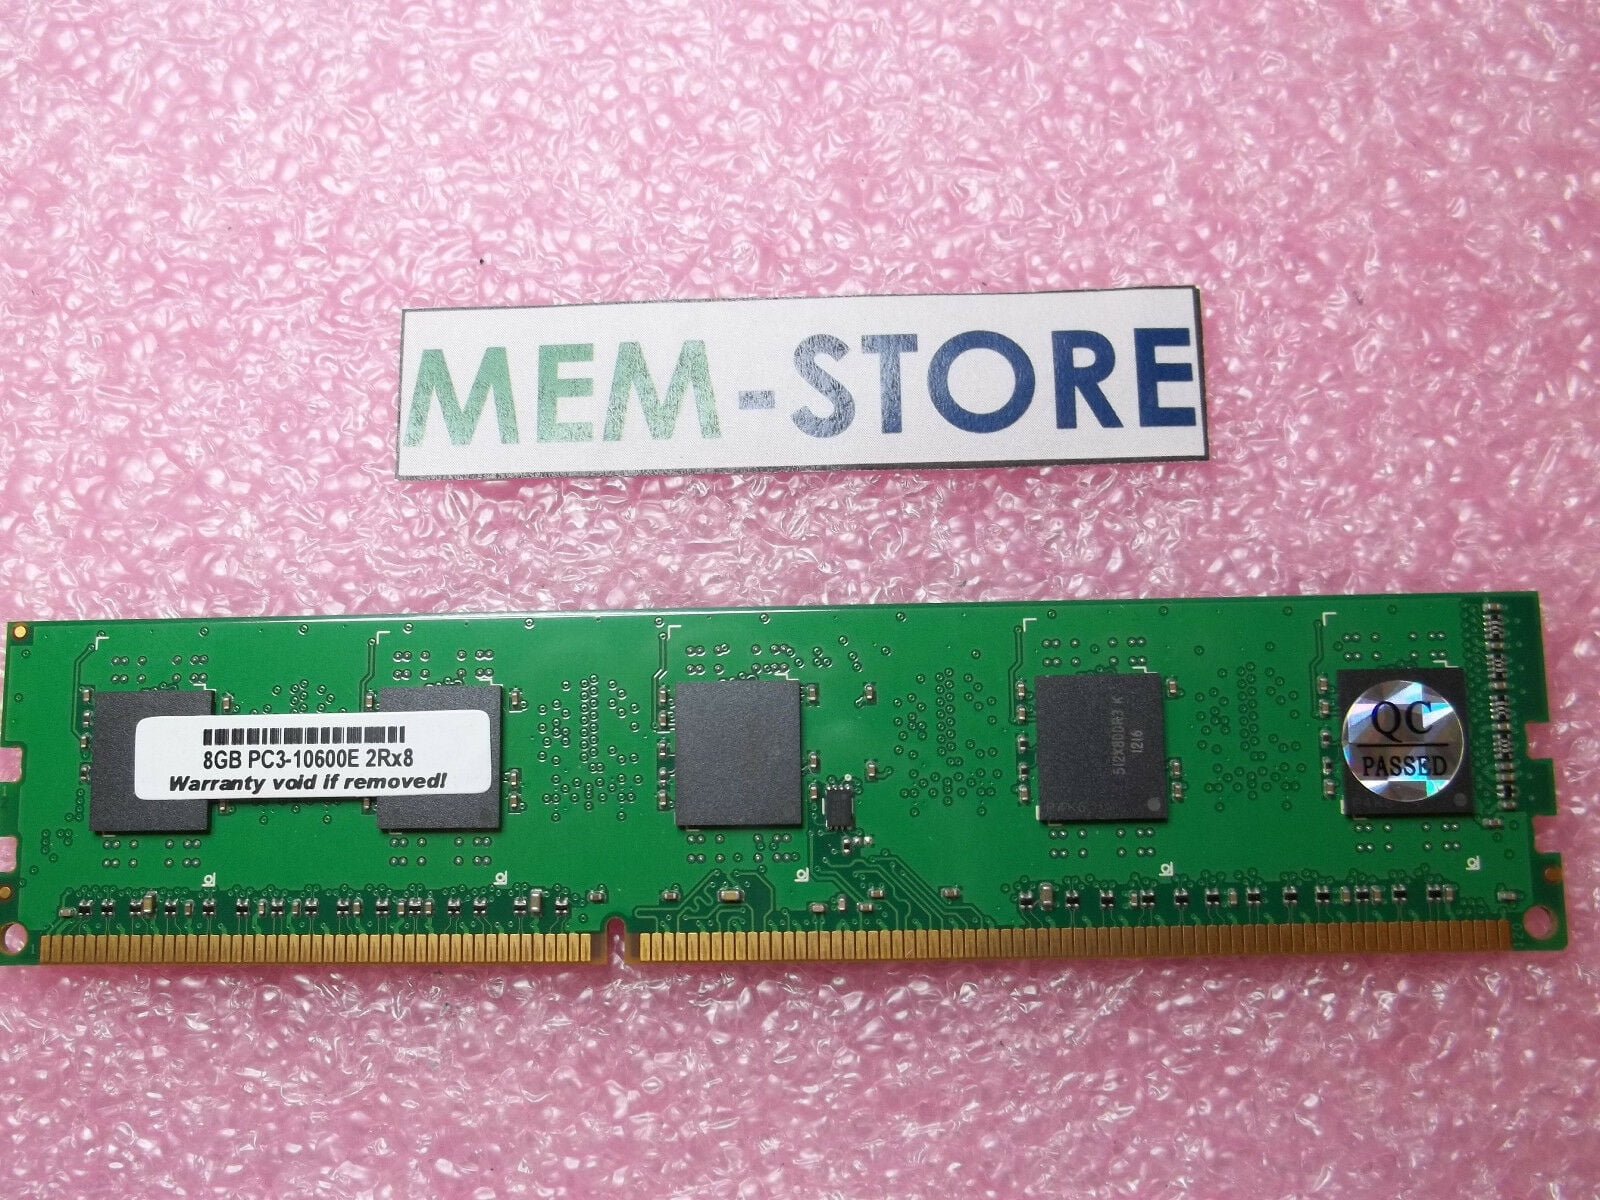 0A89461 8GB 1333MHz PC3-10600E Unbuffered RAM Memory Upgrade for Lenovo  ThinkServer TS130 TS430 (3rd Party)